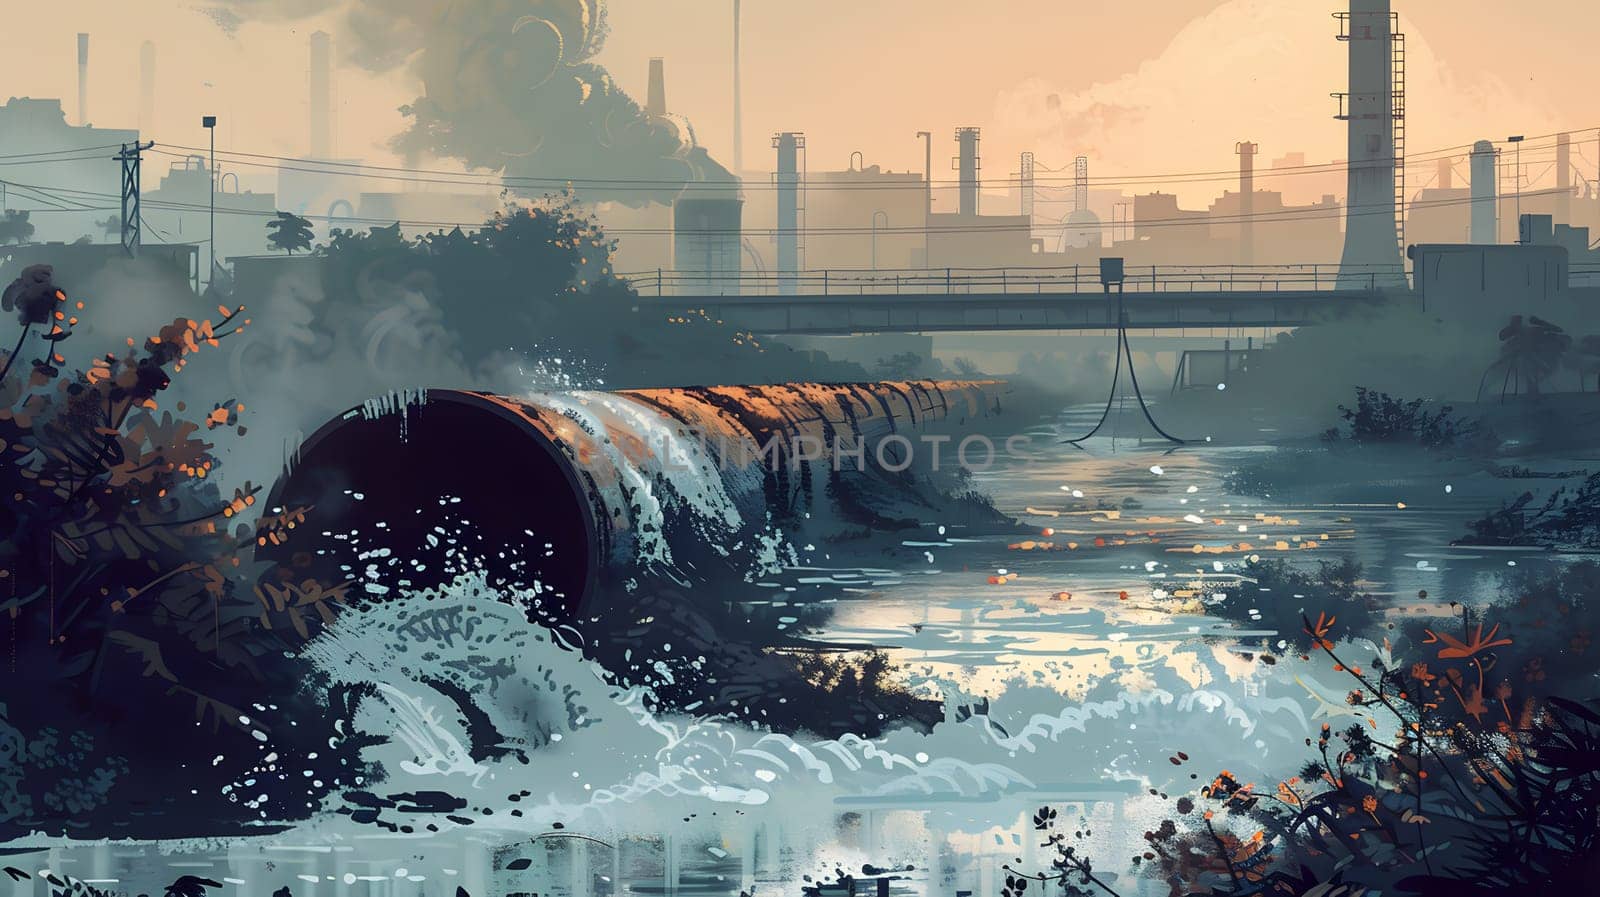 A painting of a river flowing through a pipe with a factory in the background, illustrating the importance of preserving water resources in an urban landscape